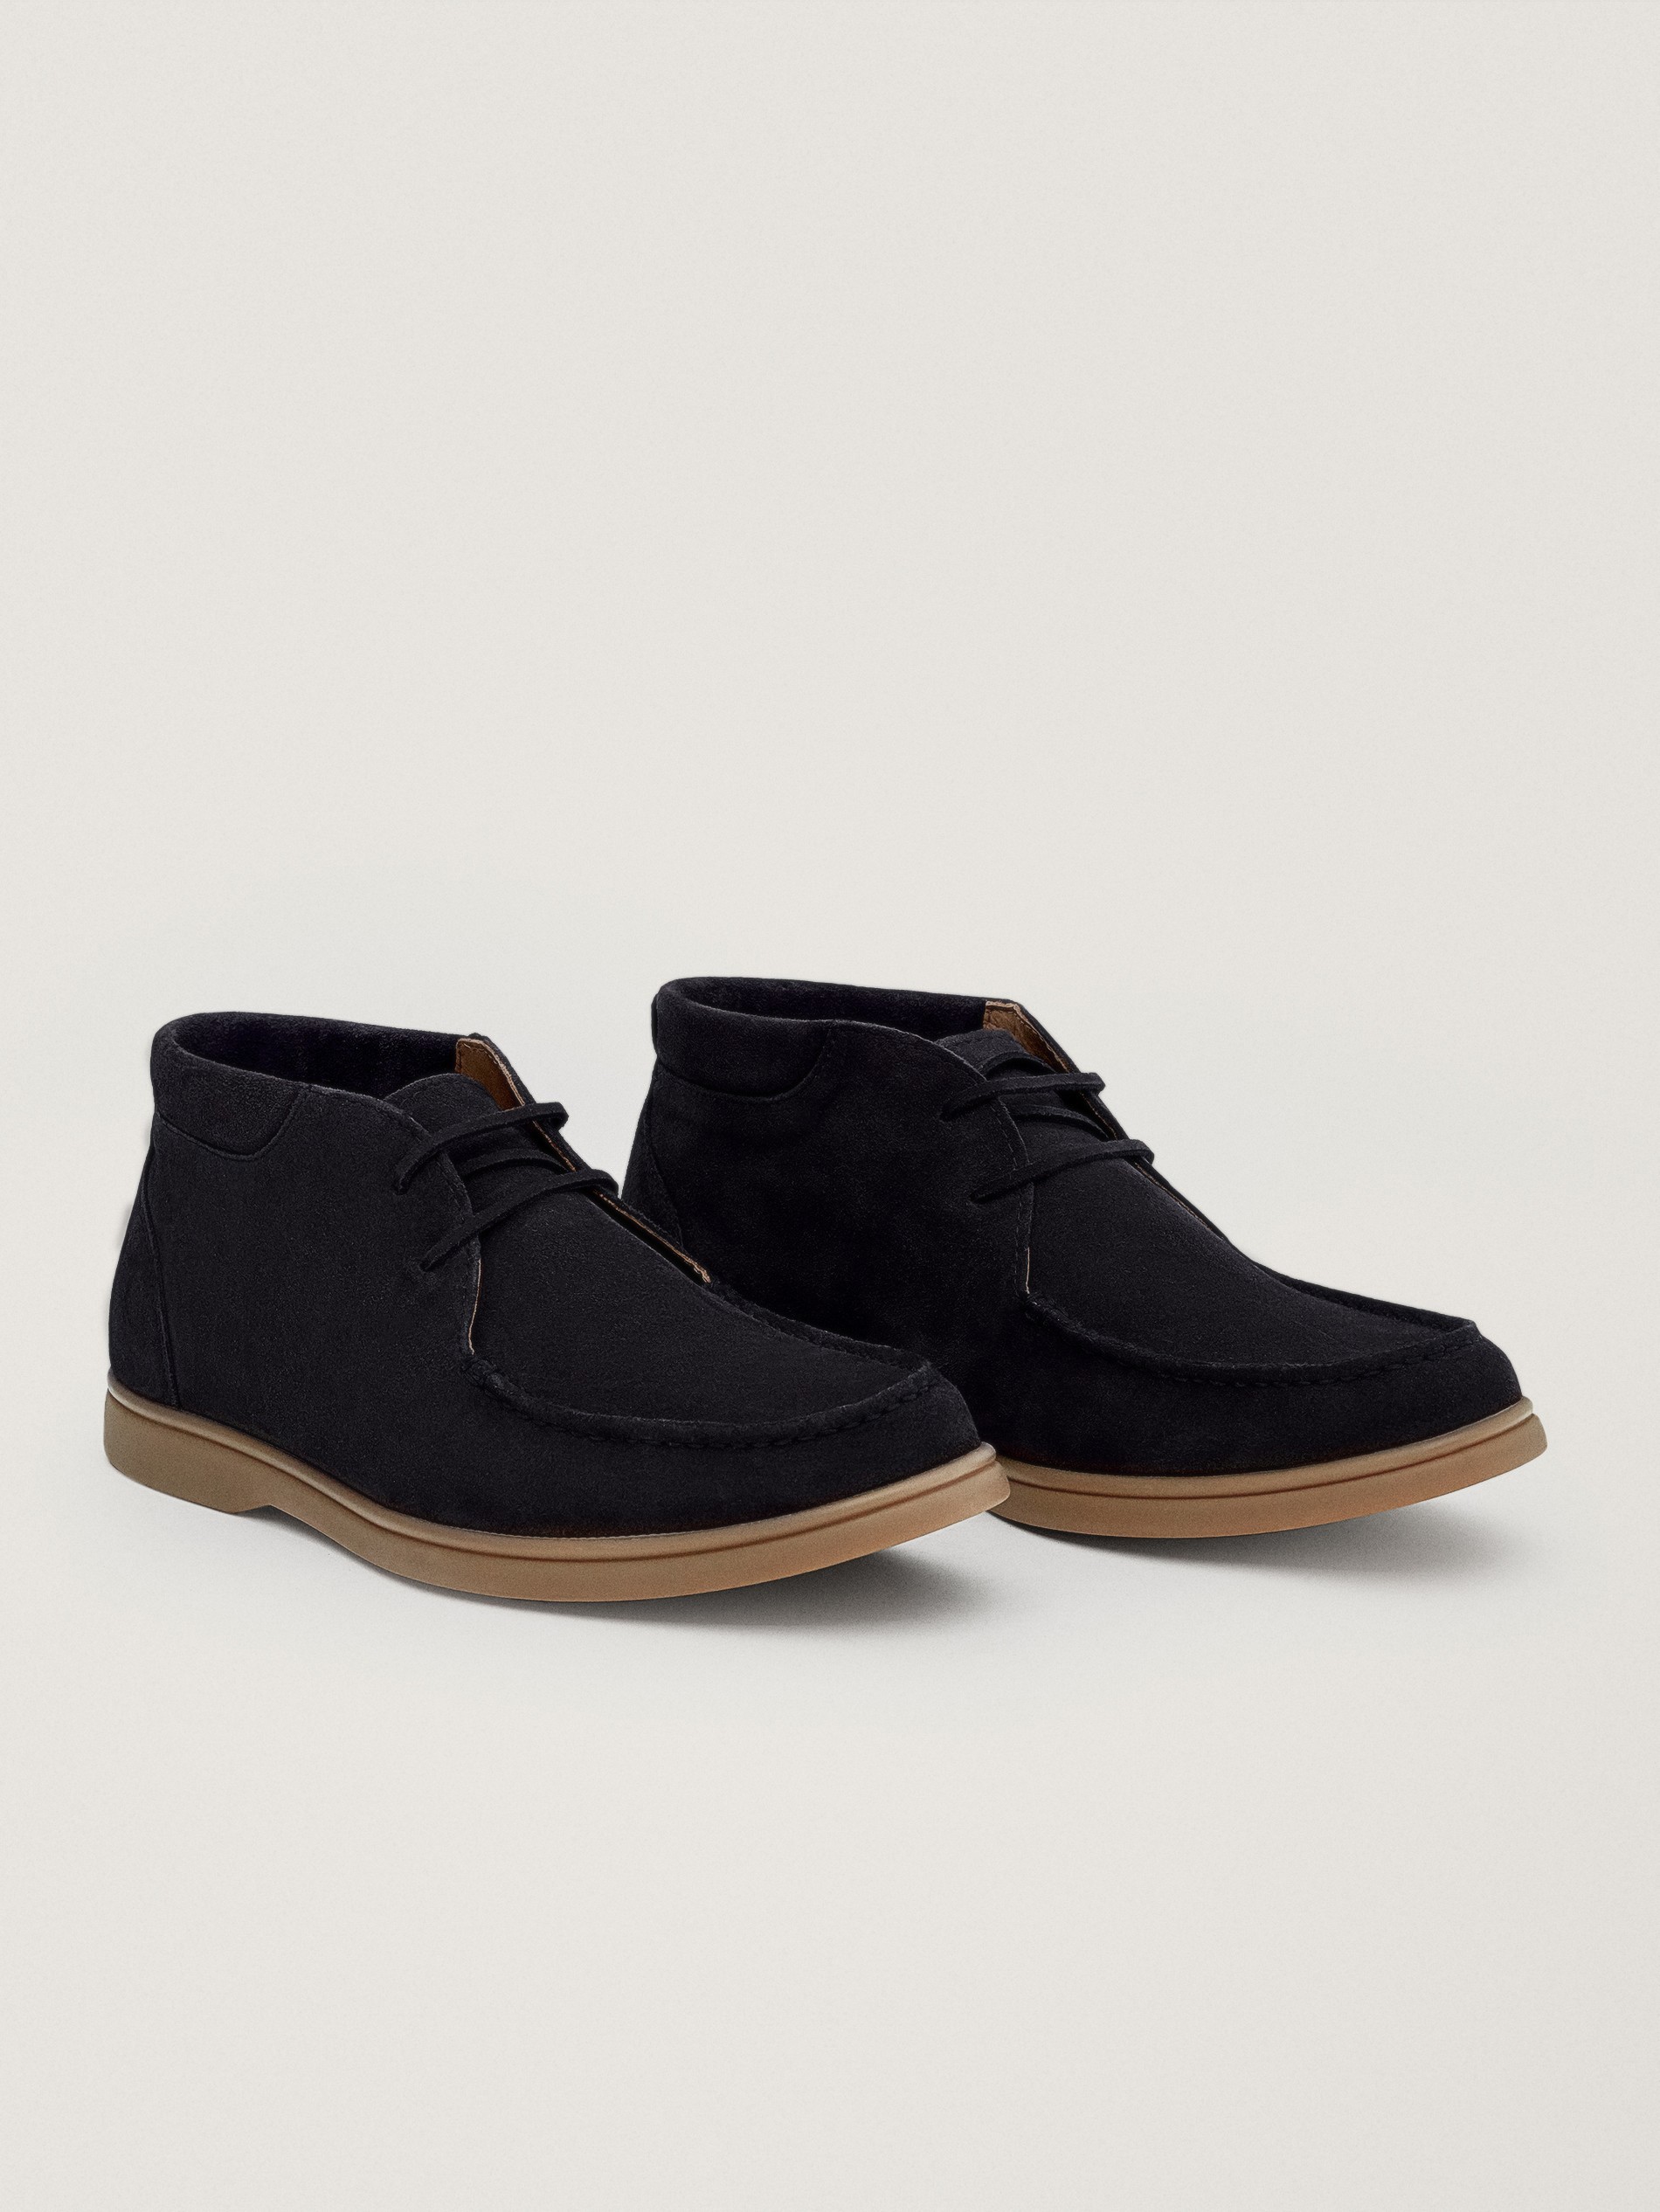 DECK SHOES - null - Massimo Dutti